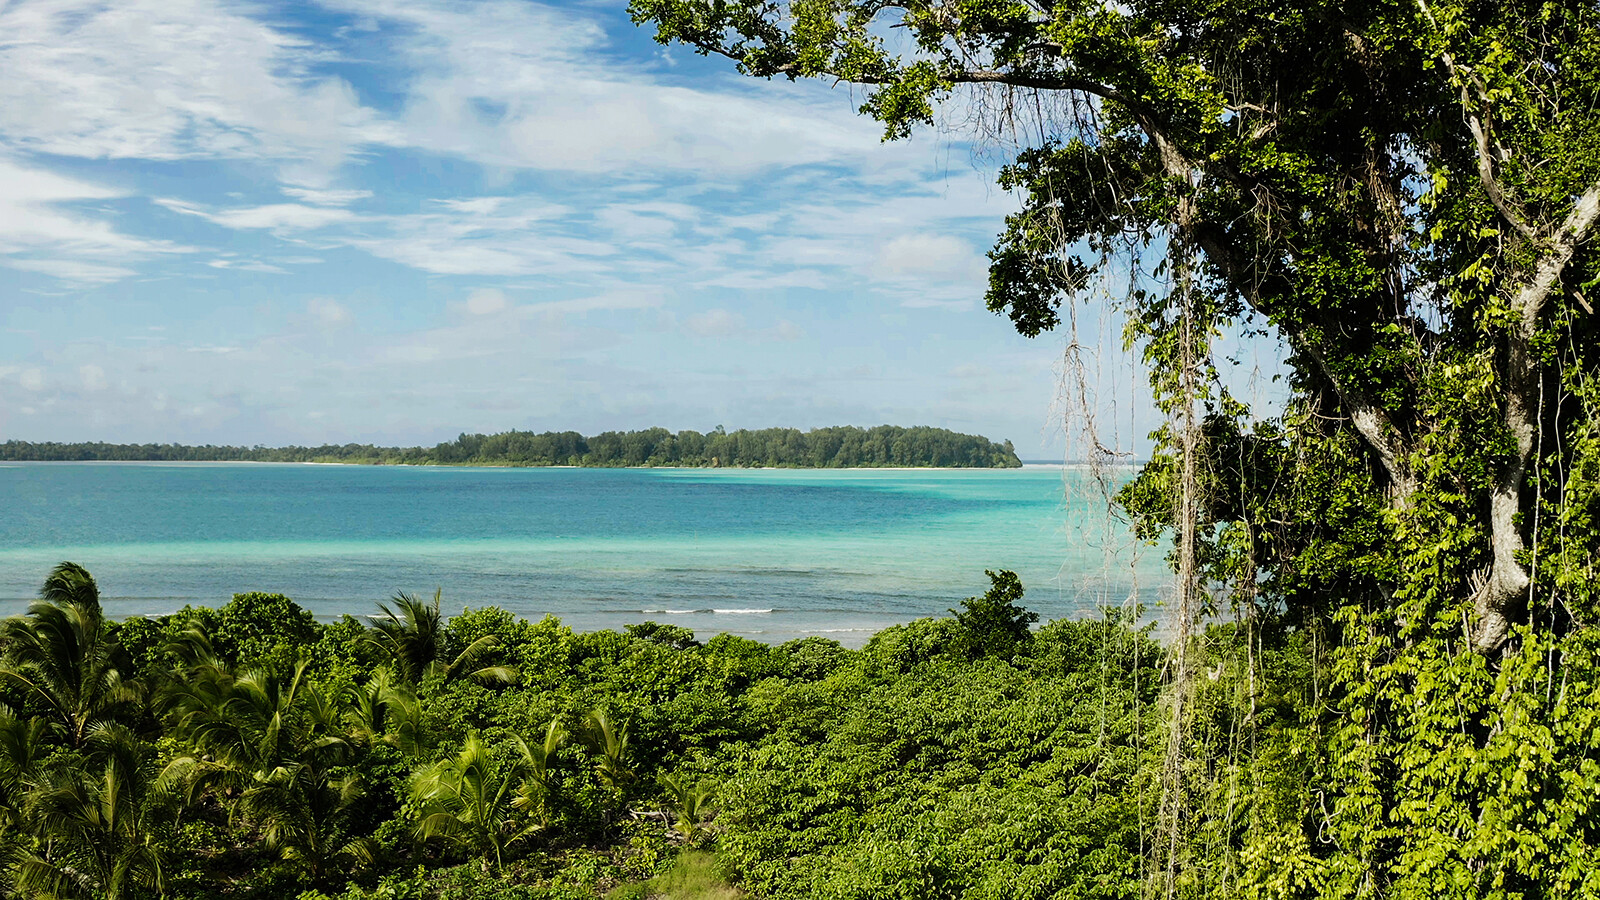 A once-in-a-lifetime auction for the rights to an Indonesian island archipelago